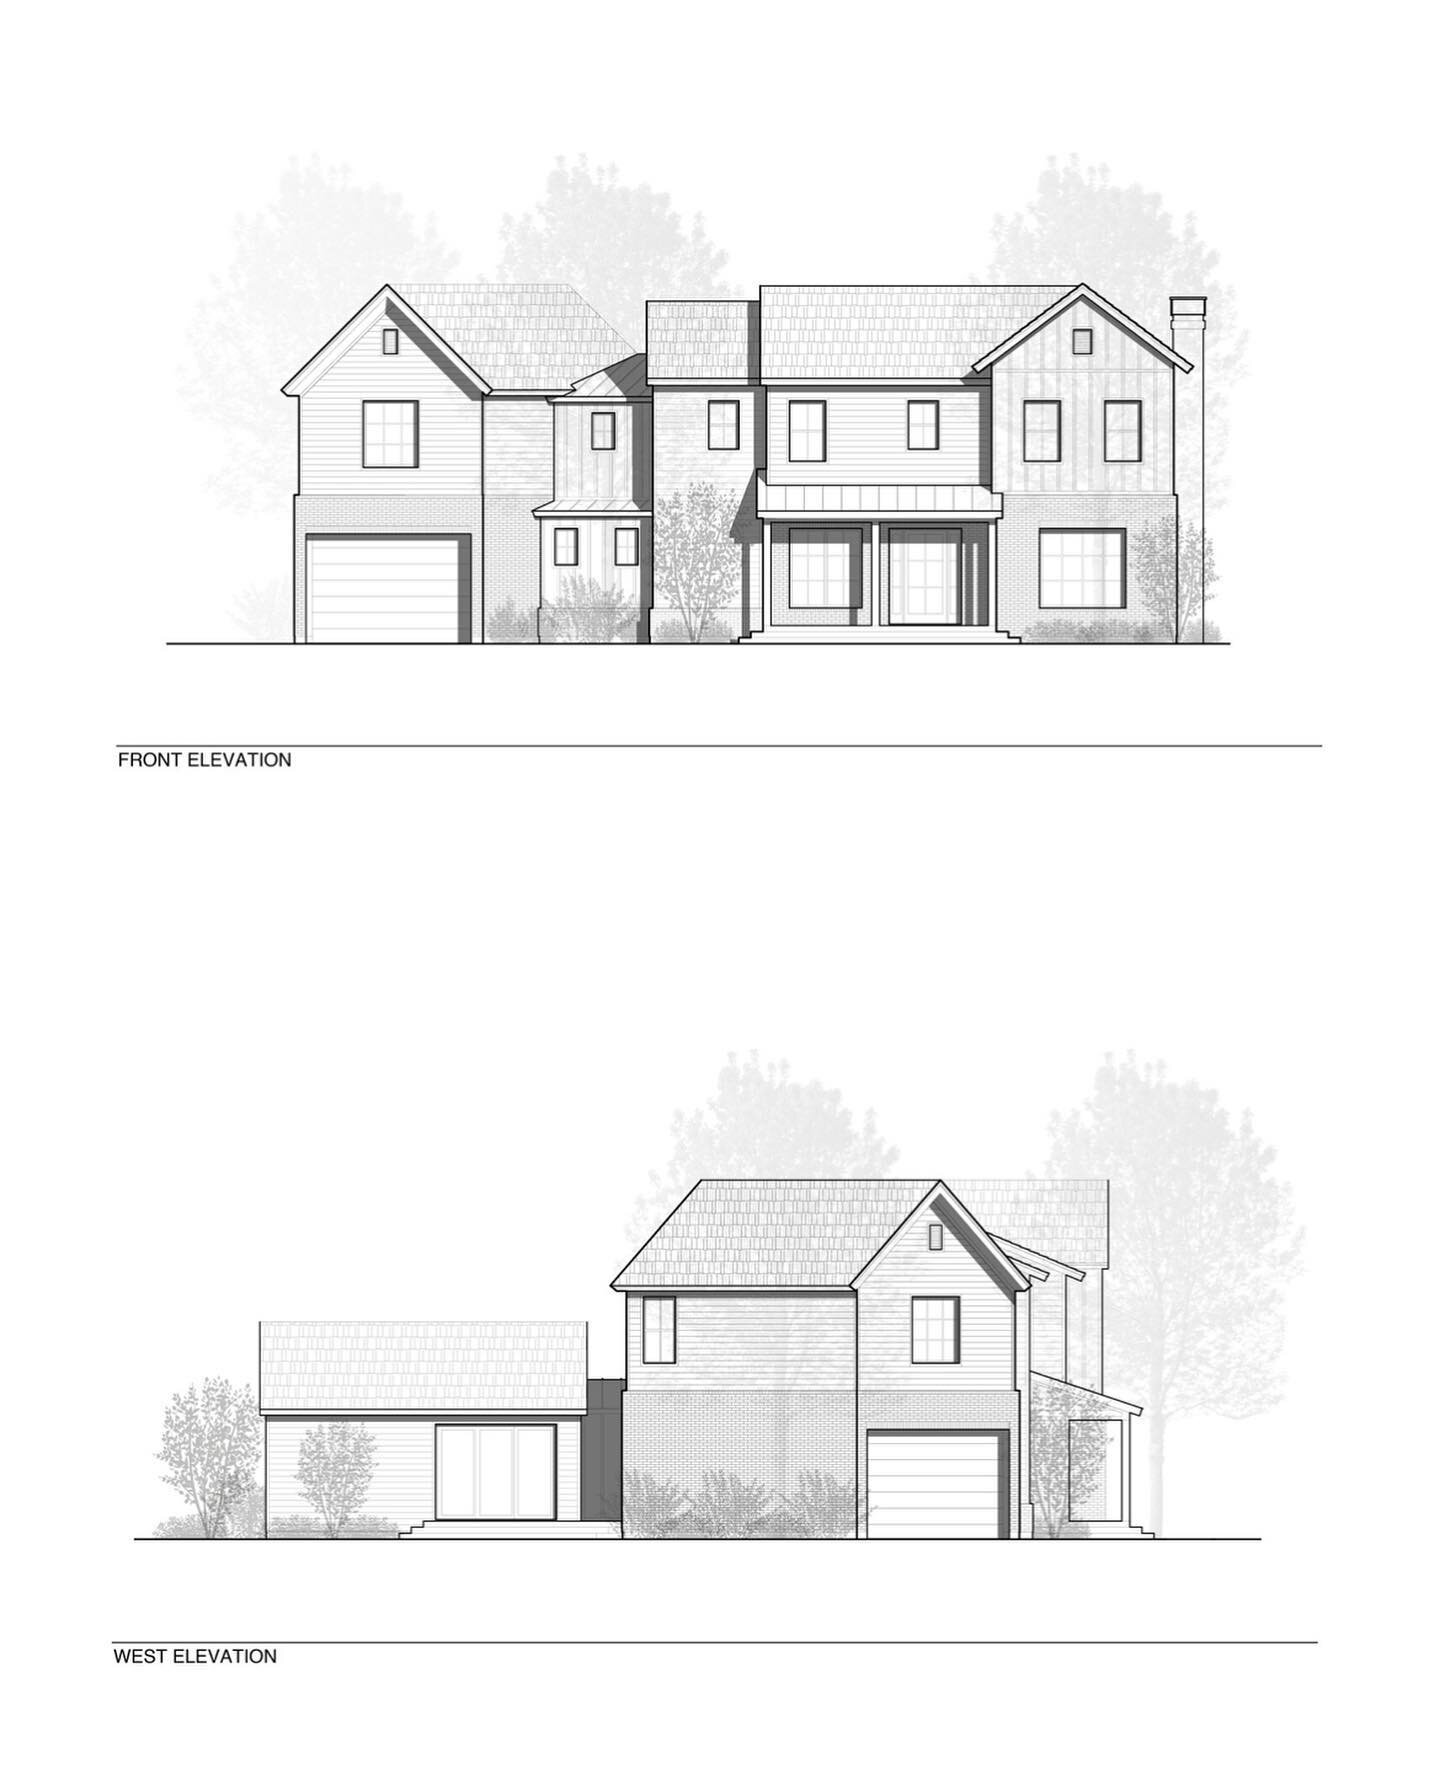 The design of our Lynbrook residence is complete. Check out all the drawings @ www.kpluswarchitecrs.com.